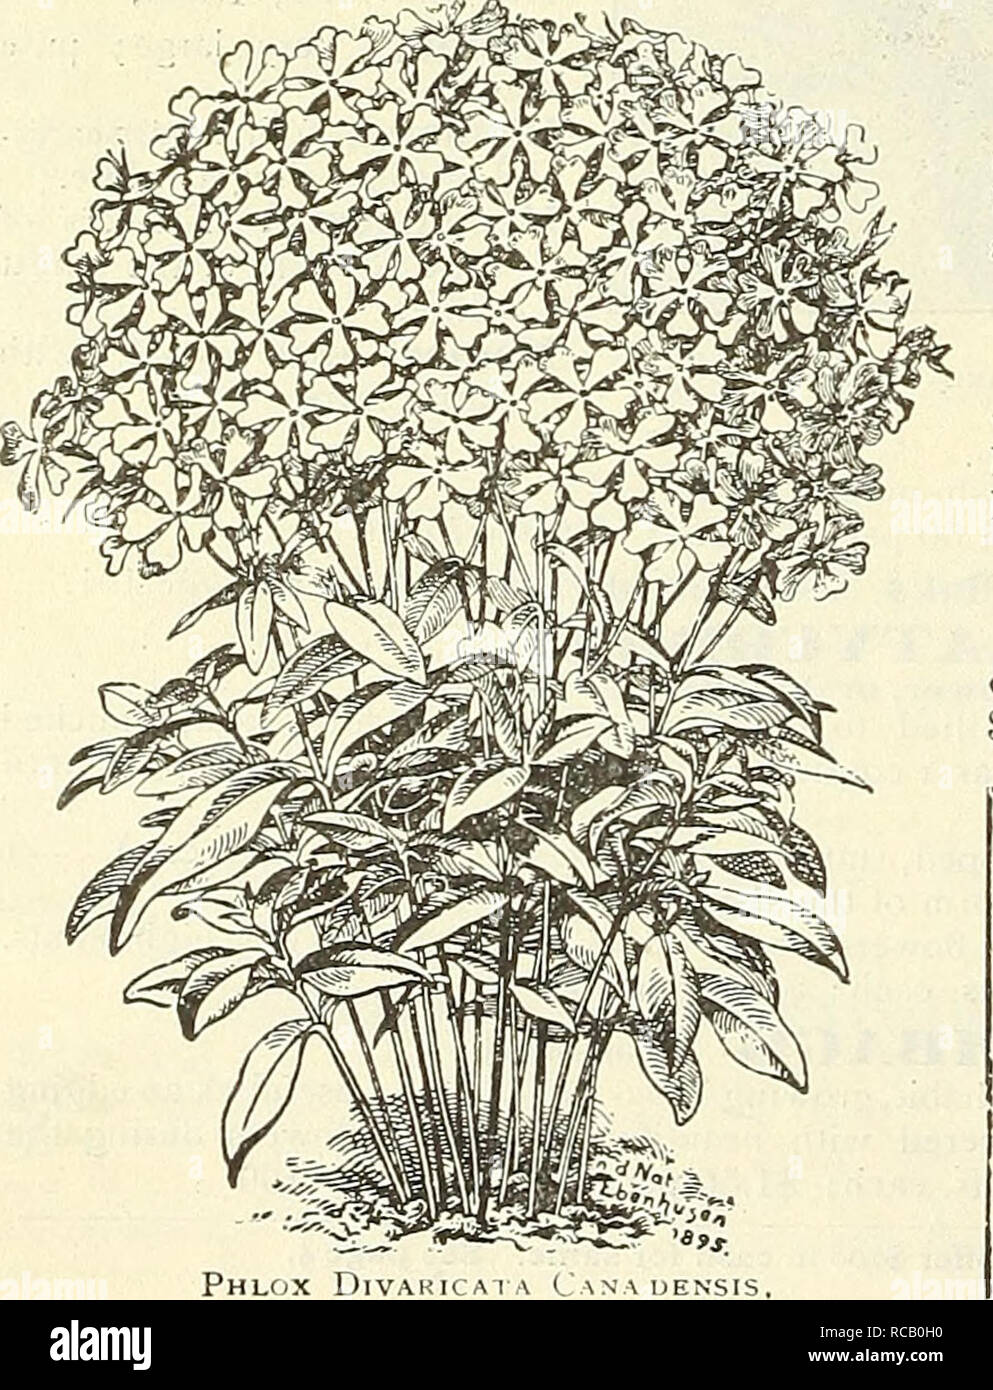 . Dreer's garden book : 1904. Seeds Catalogs; Nursery stock Catalogs; Gardening Equipment and supplies Catalogs; Flowers Seeds Catalogs; Vegetables Seeds Catalogs; Fruit Seeds Catalogs. Phlox Subulata. Hardy Phlox Pantheon. PHI.OX SUBFLATA. (Moss, or nrouiitain Pink.) An early s| ring-fluwermg ty| e, widi pretty moss-like evergreen foliage, which, during the flowering season, is hidden under the masses of bloom. An excellent plant for tfee rockery, the border, and invaluable for car- peting the ground or covering graves. (See cut.) We offer five varieties. Lilacina. Light lilac. NelSOni. Pure  Stock Photo